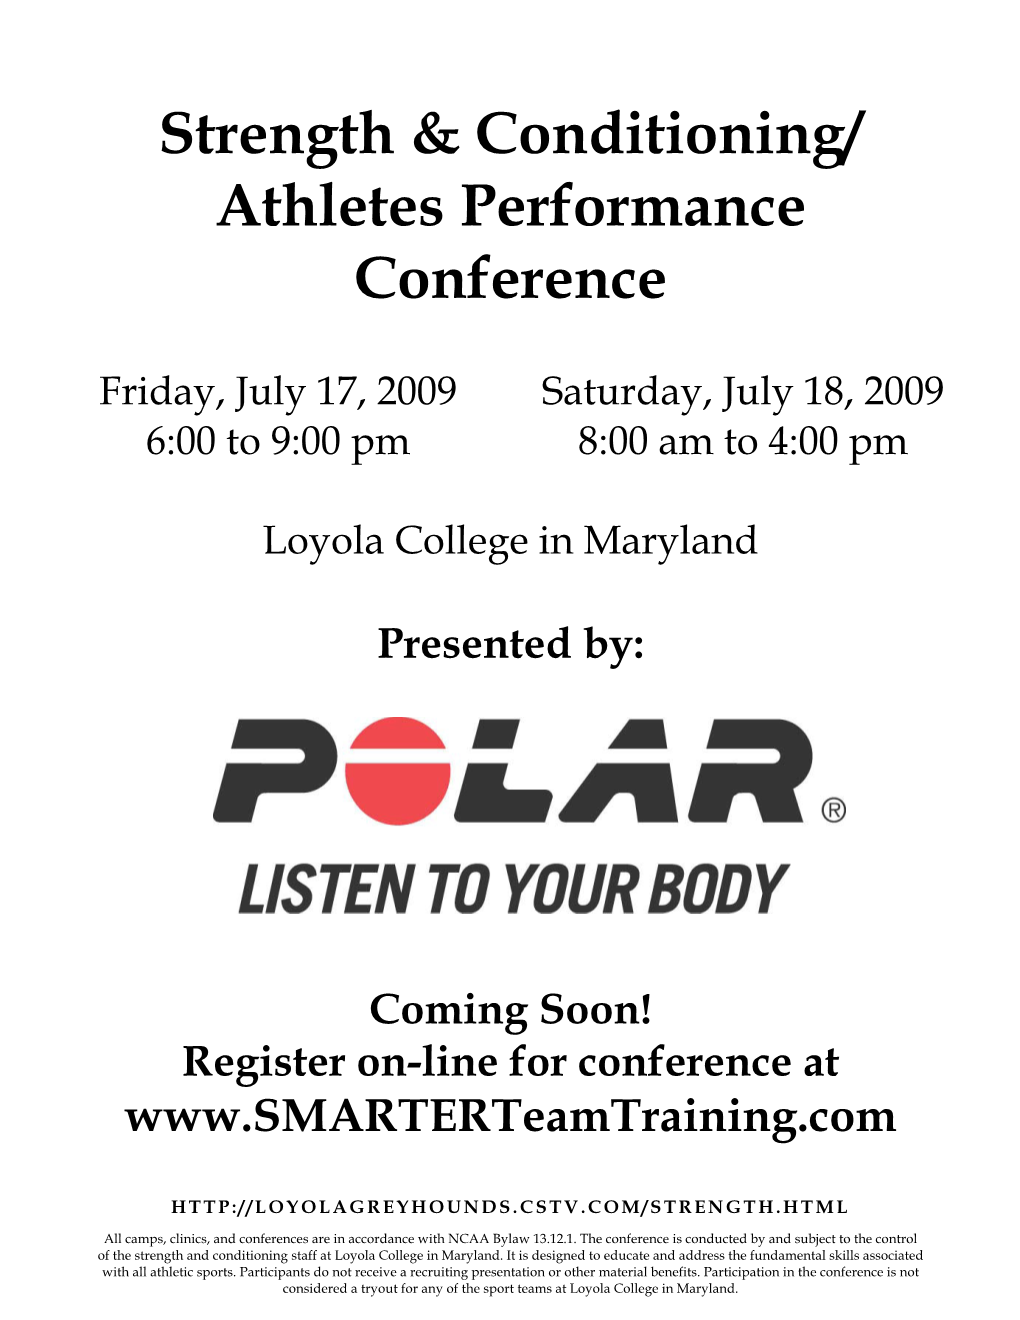 Strength & Conditioning/ Athletes Performance Conference